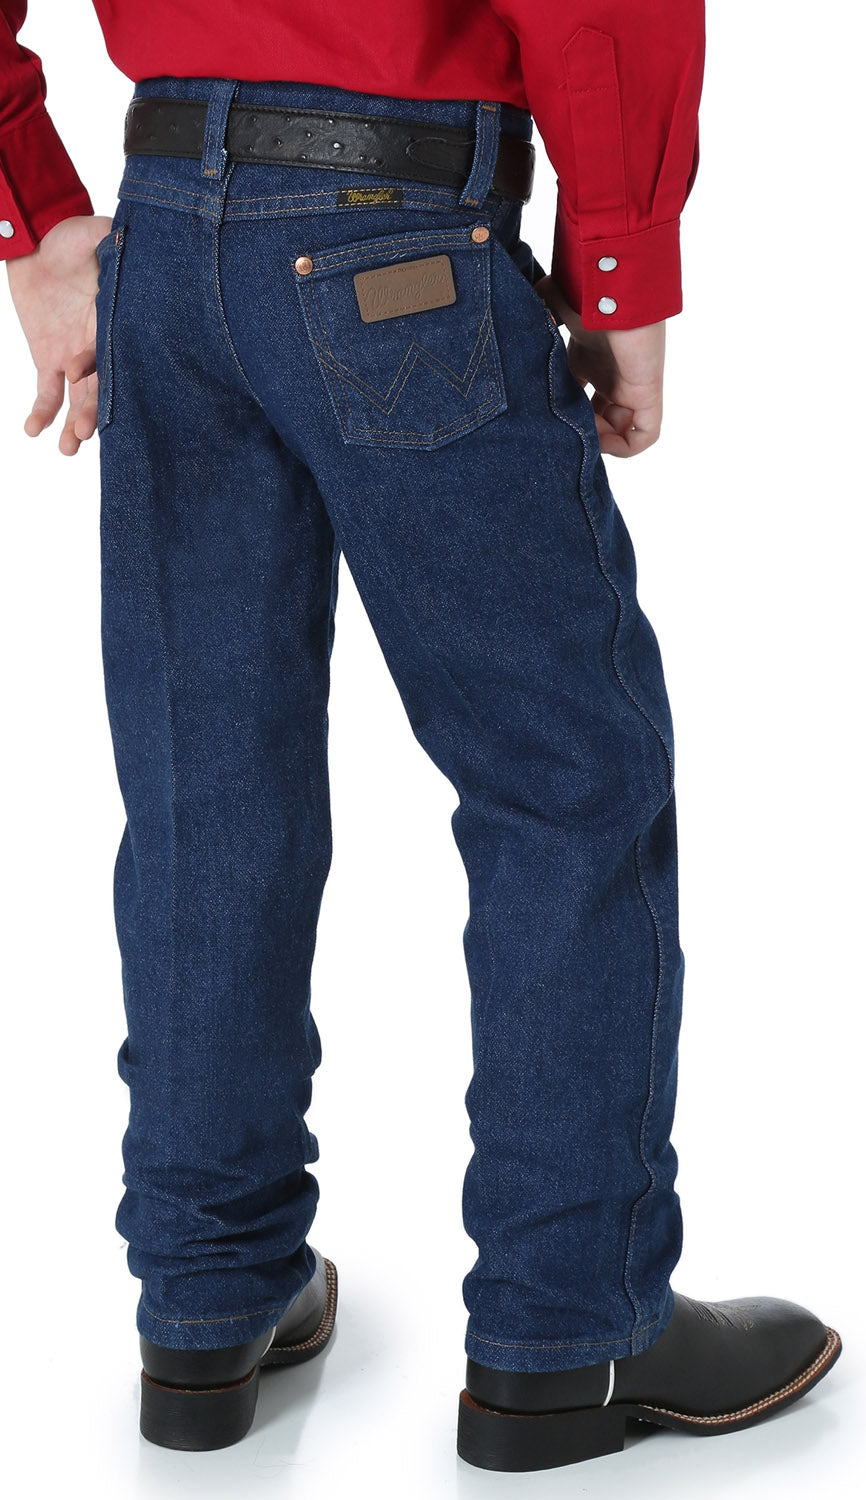 cut jeans for boy